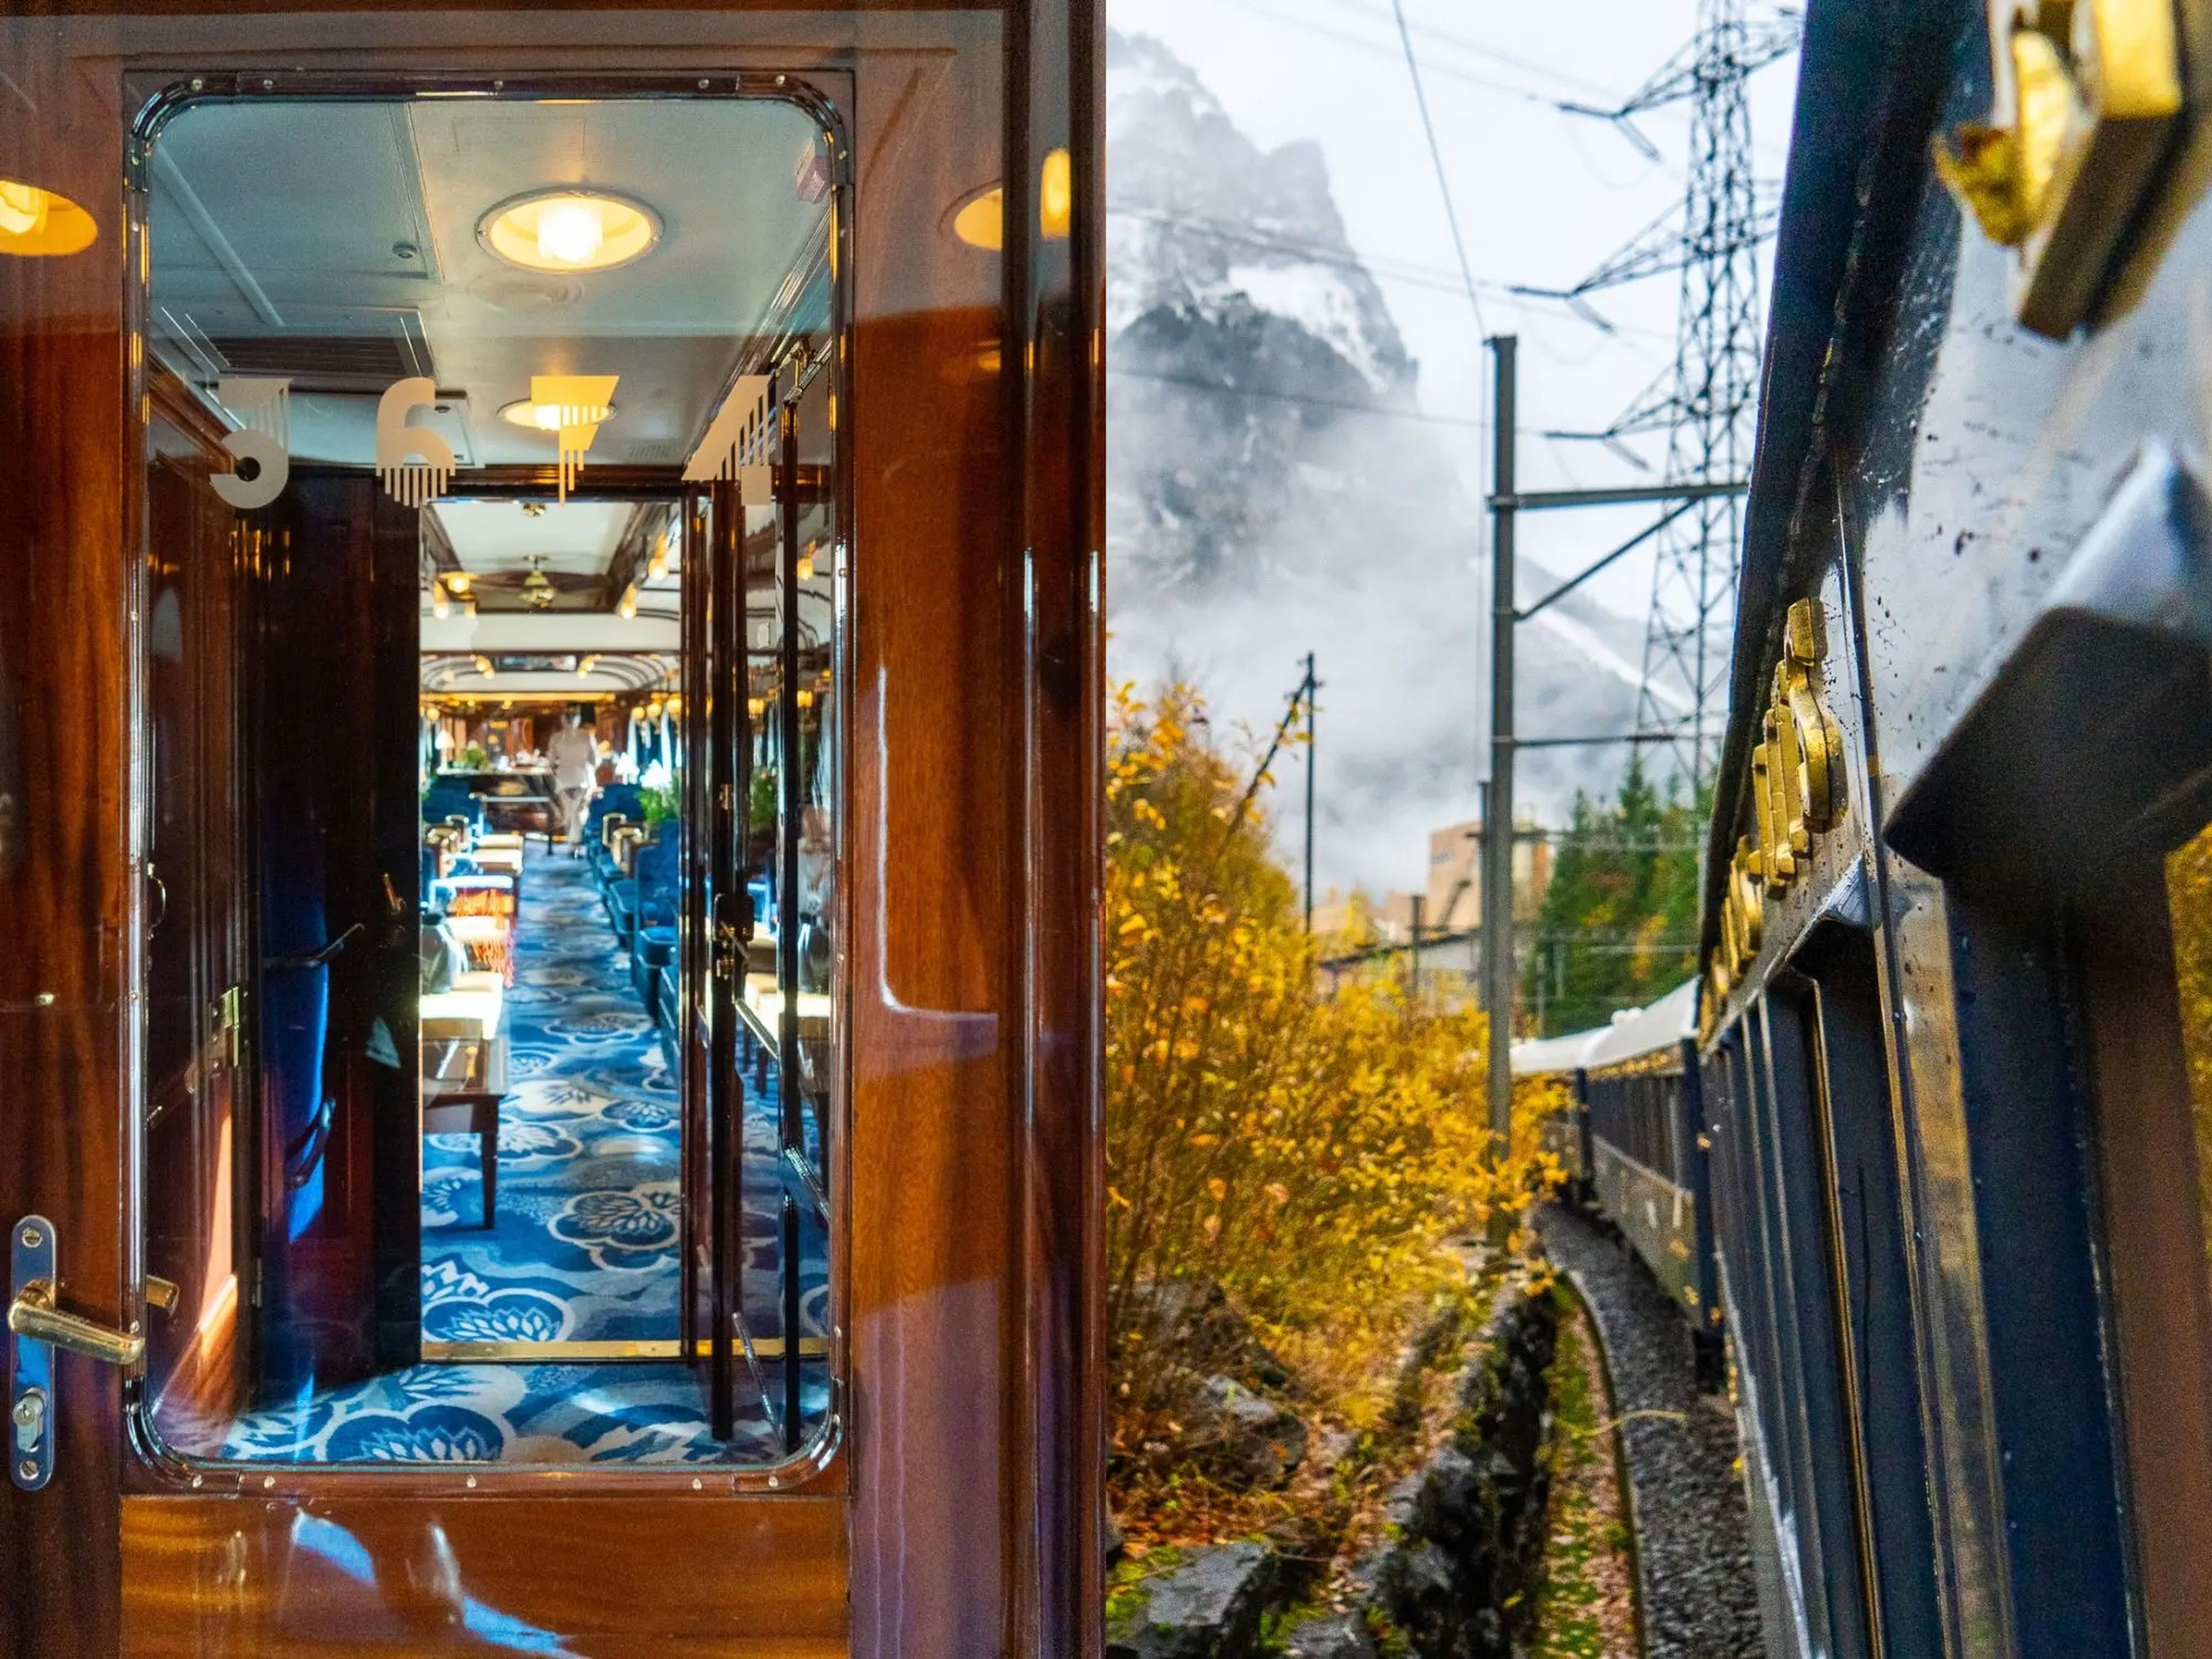 Left: A shiny, windowed, wooden train door leads to a carriage with blue carpets and seating. Right: A blue train with gold lettering moves in front of mountains with foliage on the left.